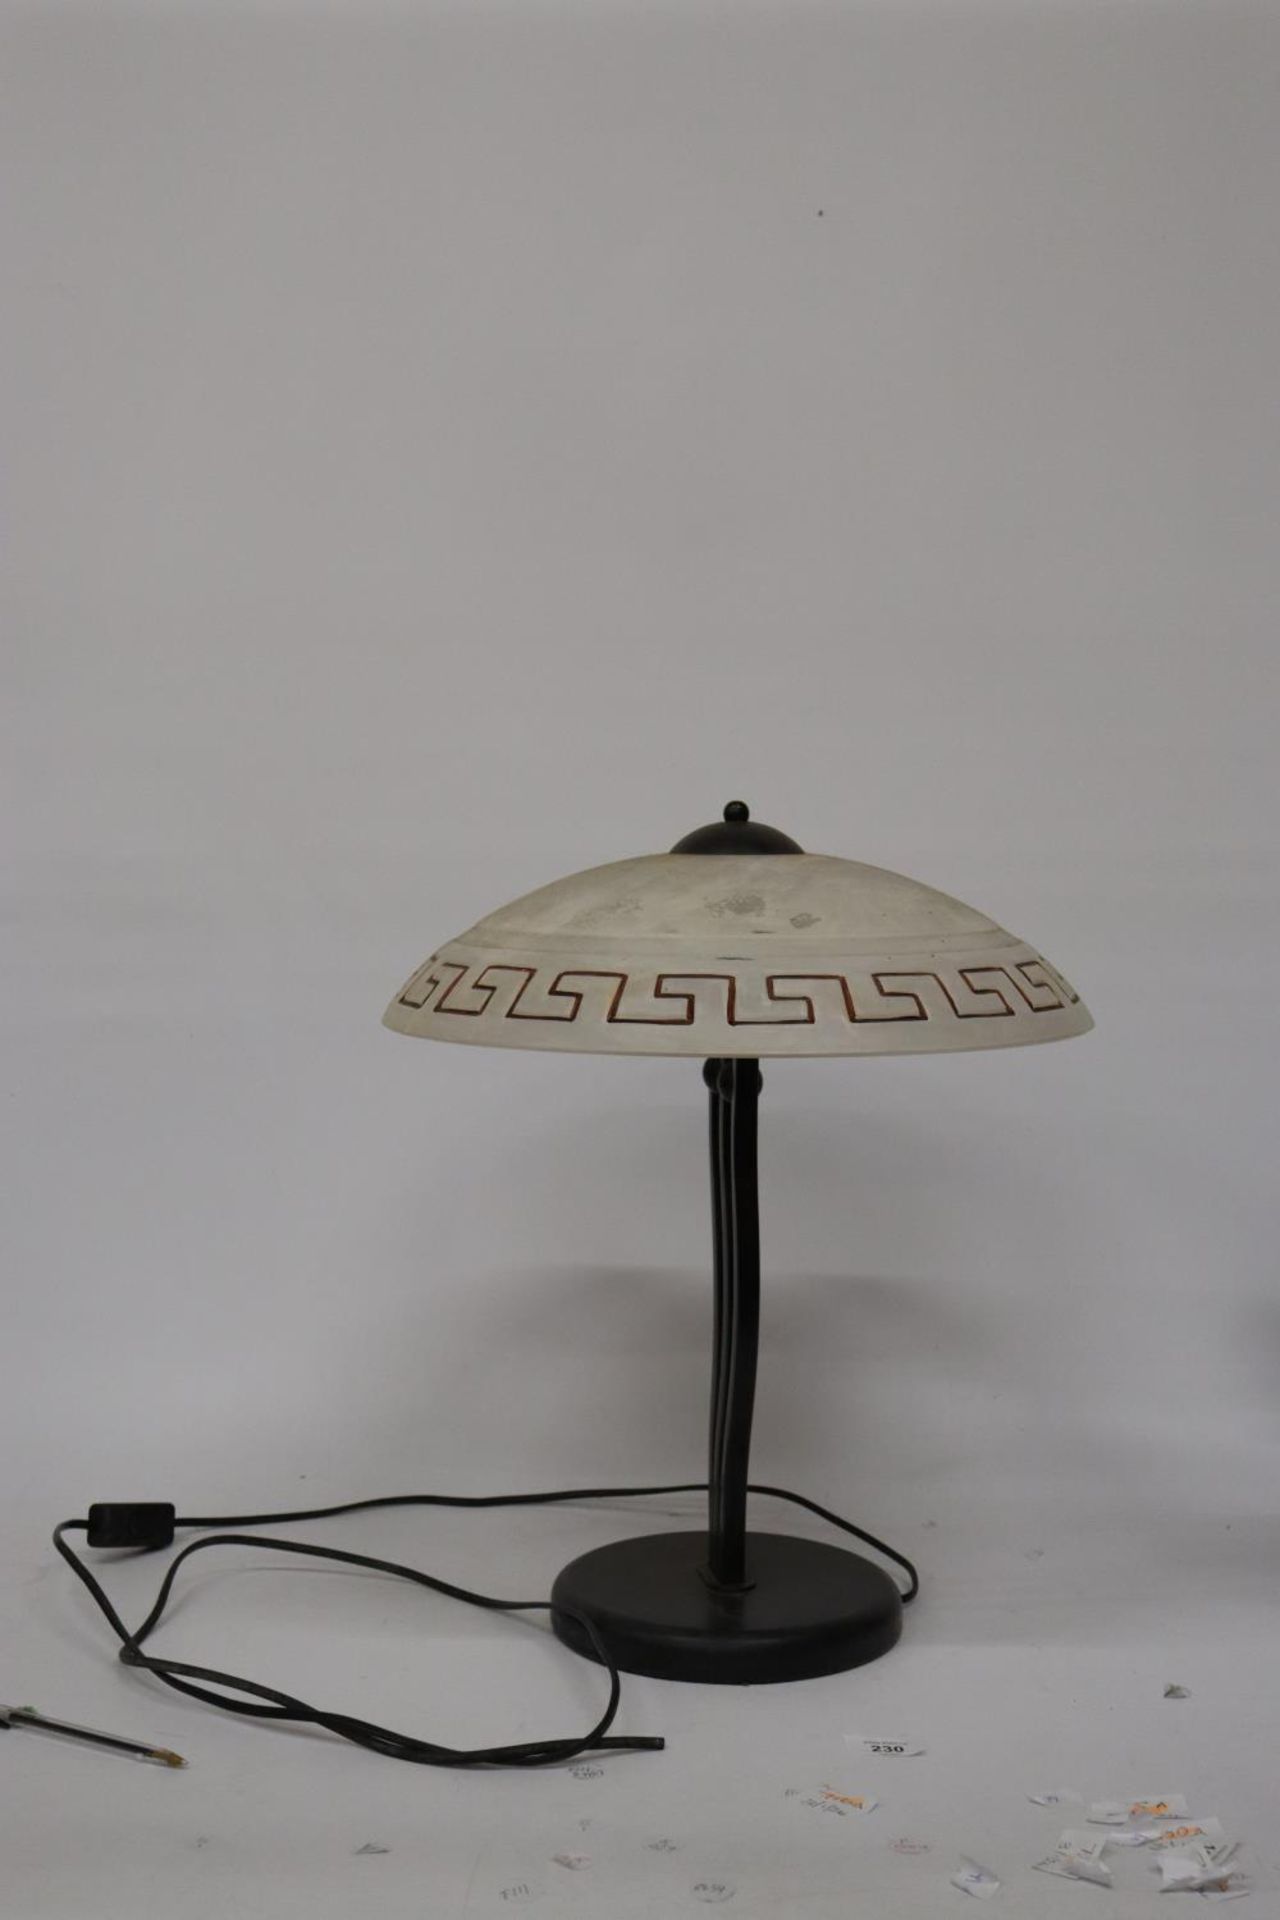 A HEAVY VINTAGE STYLE TABLE LAMP WITH METAL BASE AND GLASS SHADE, HEIGHT APPROX 42CM - Image 3 of 5